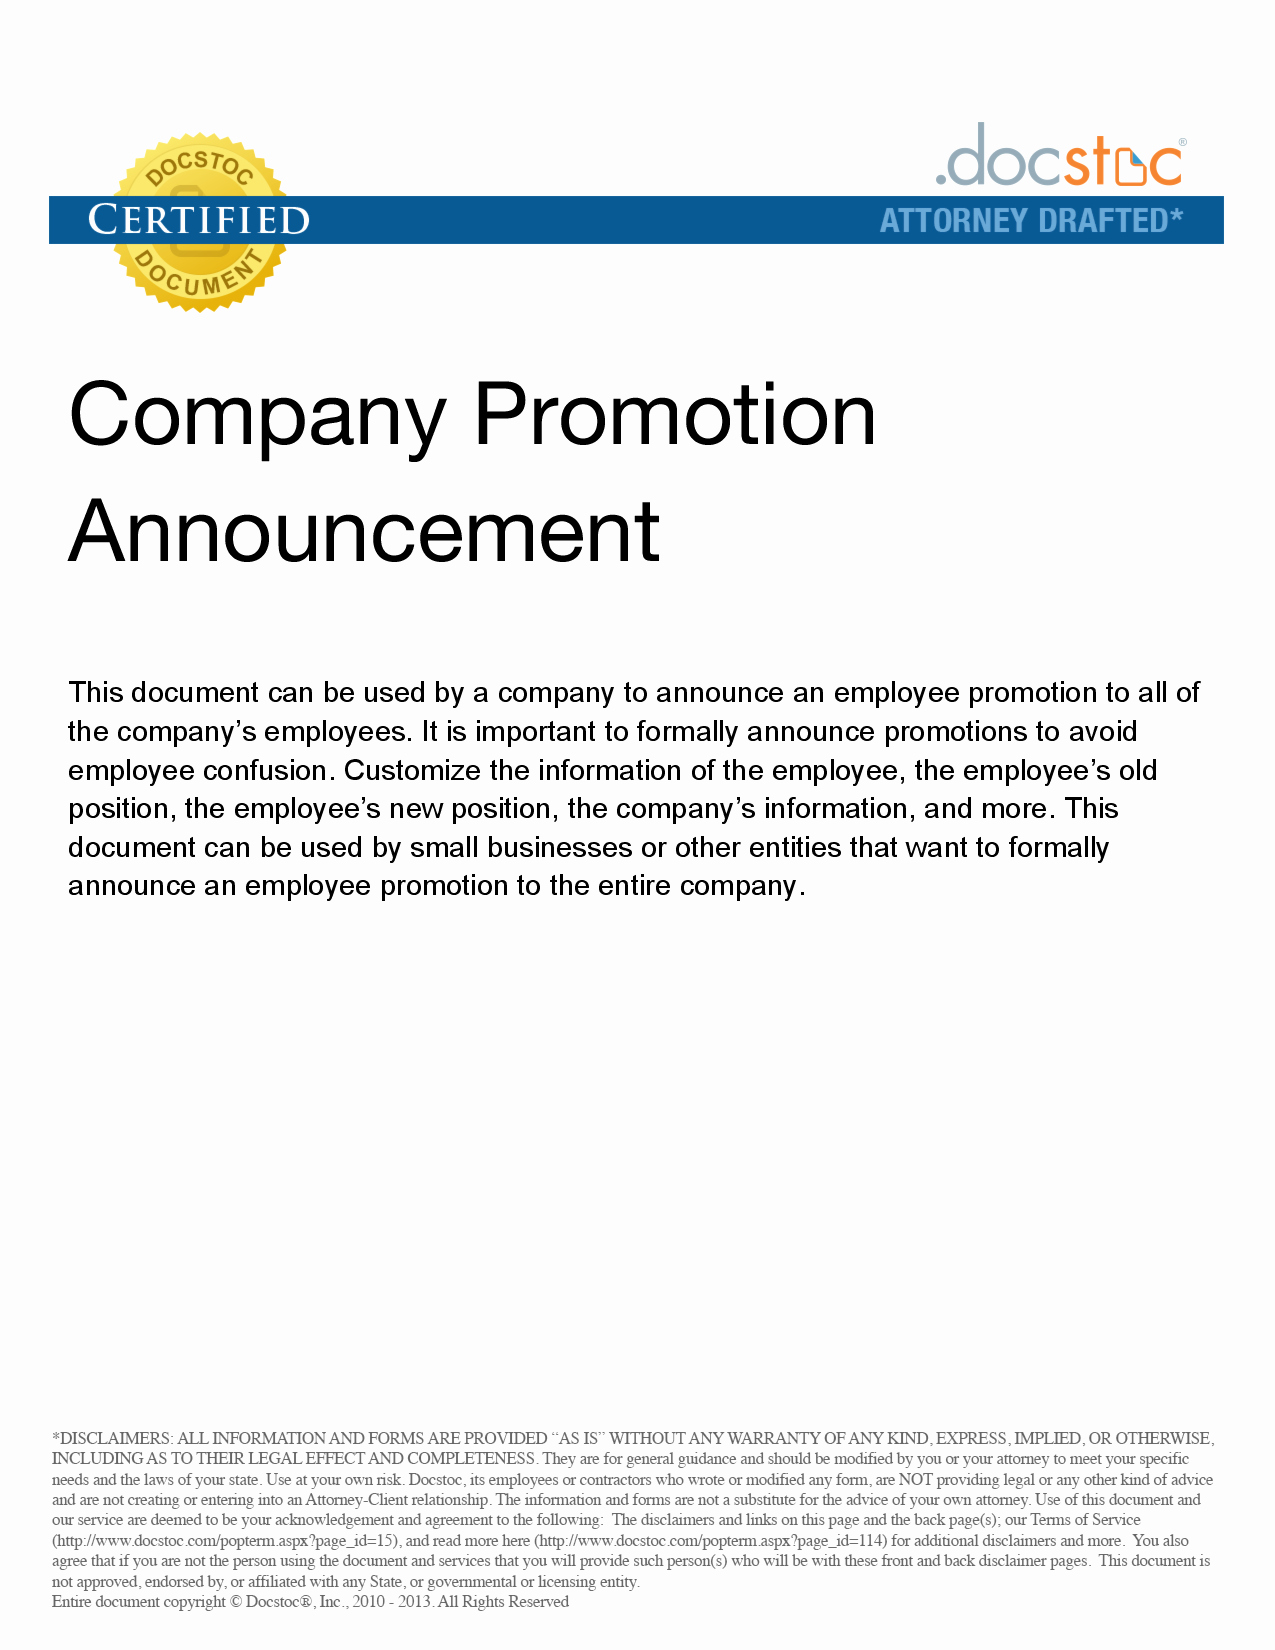 Employee Promotion Announcement Email Sample Best Of Best S Of Job Promotion Announcement Examples